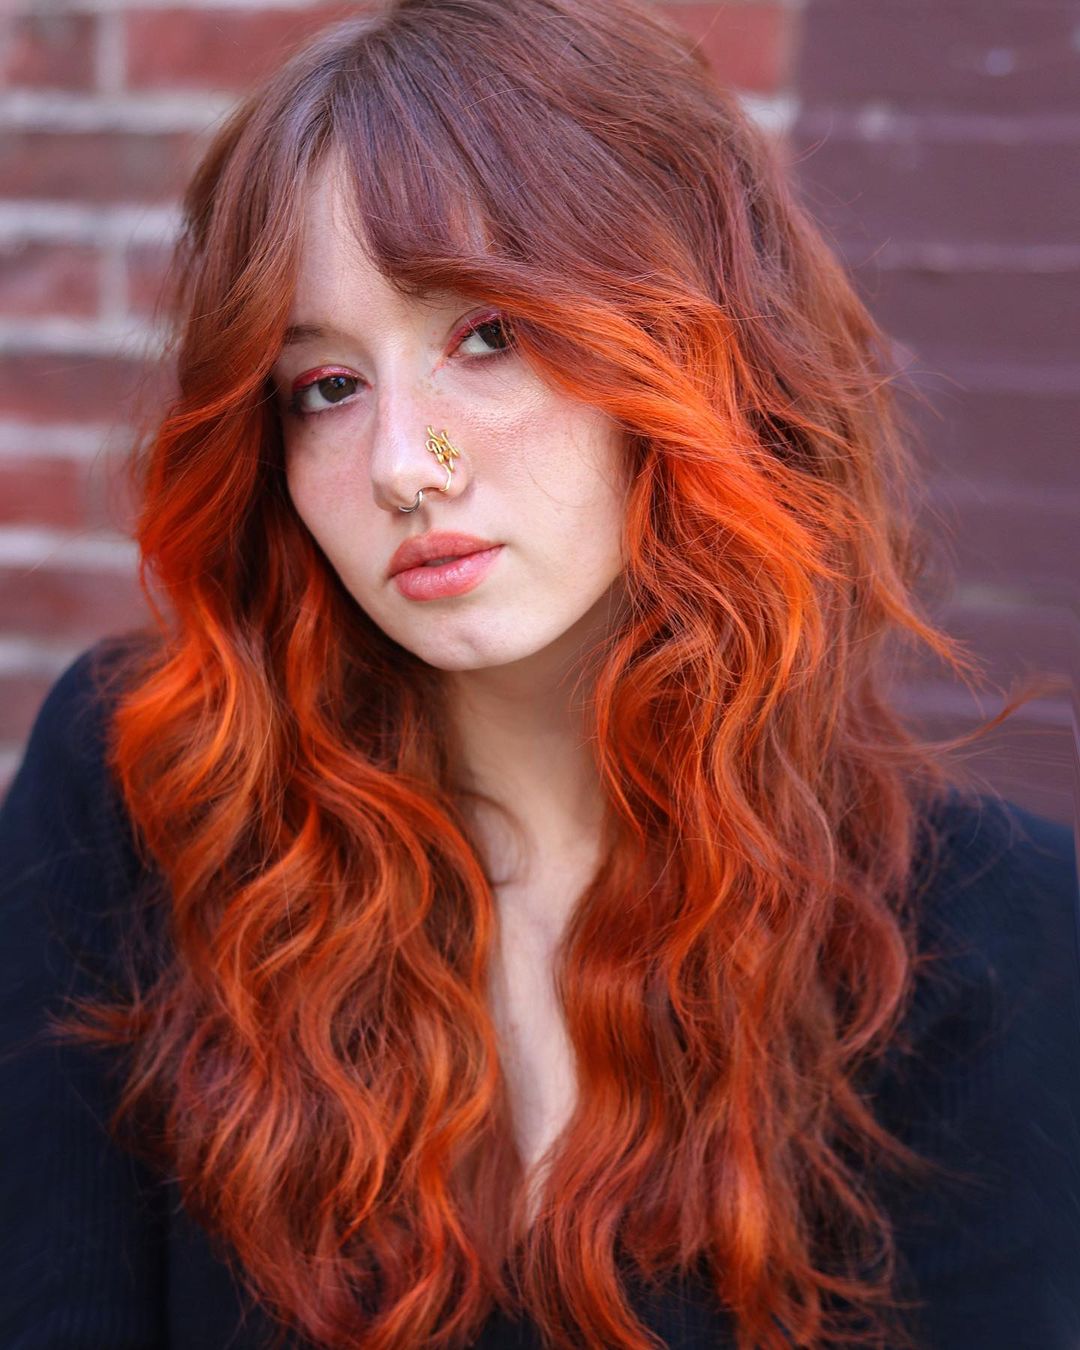 20 Vibrant Orange Hair Ideas to Electrify Your Looks - Hairstyle